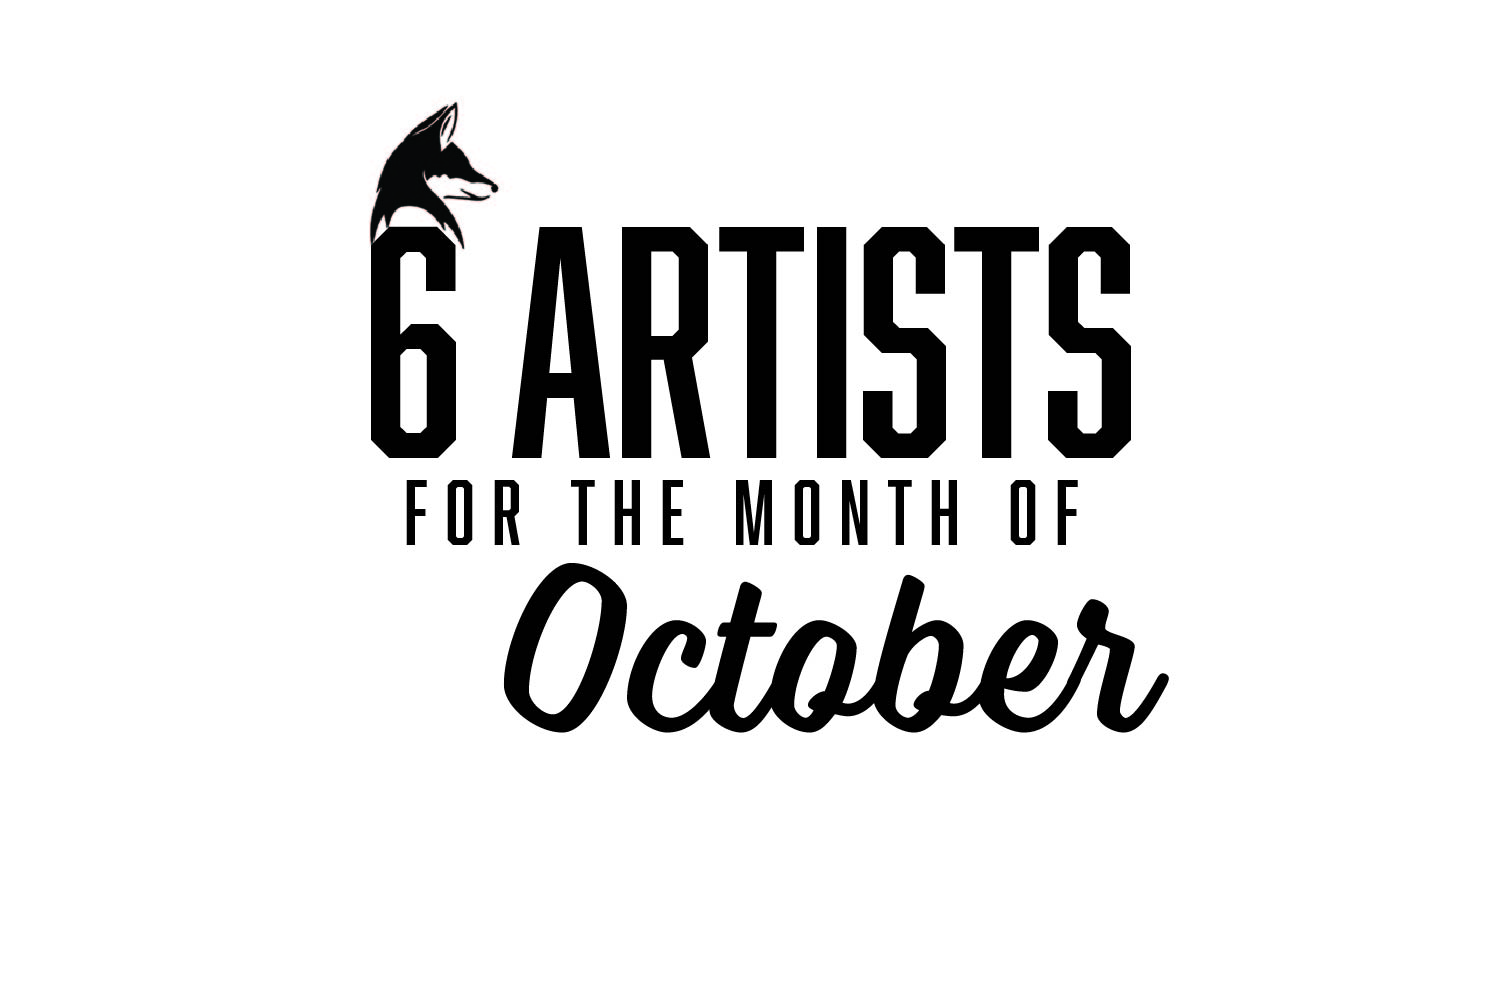 Six+Artists+You+Should+Be+Listening+To%3A+October+2020+EDITION